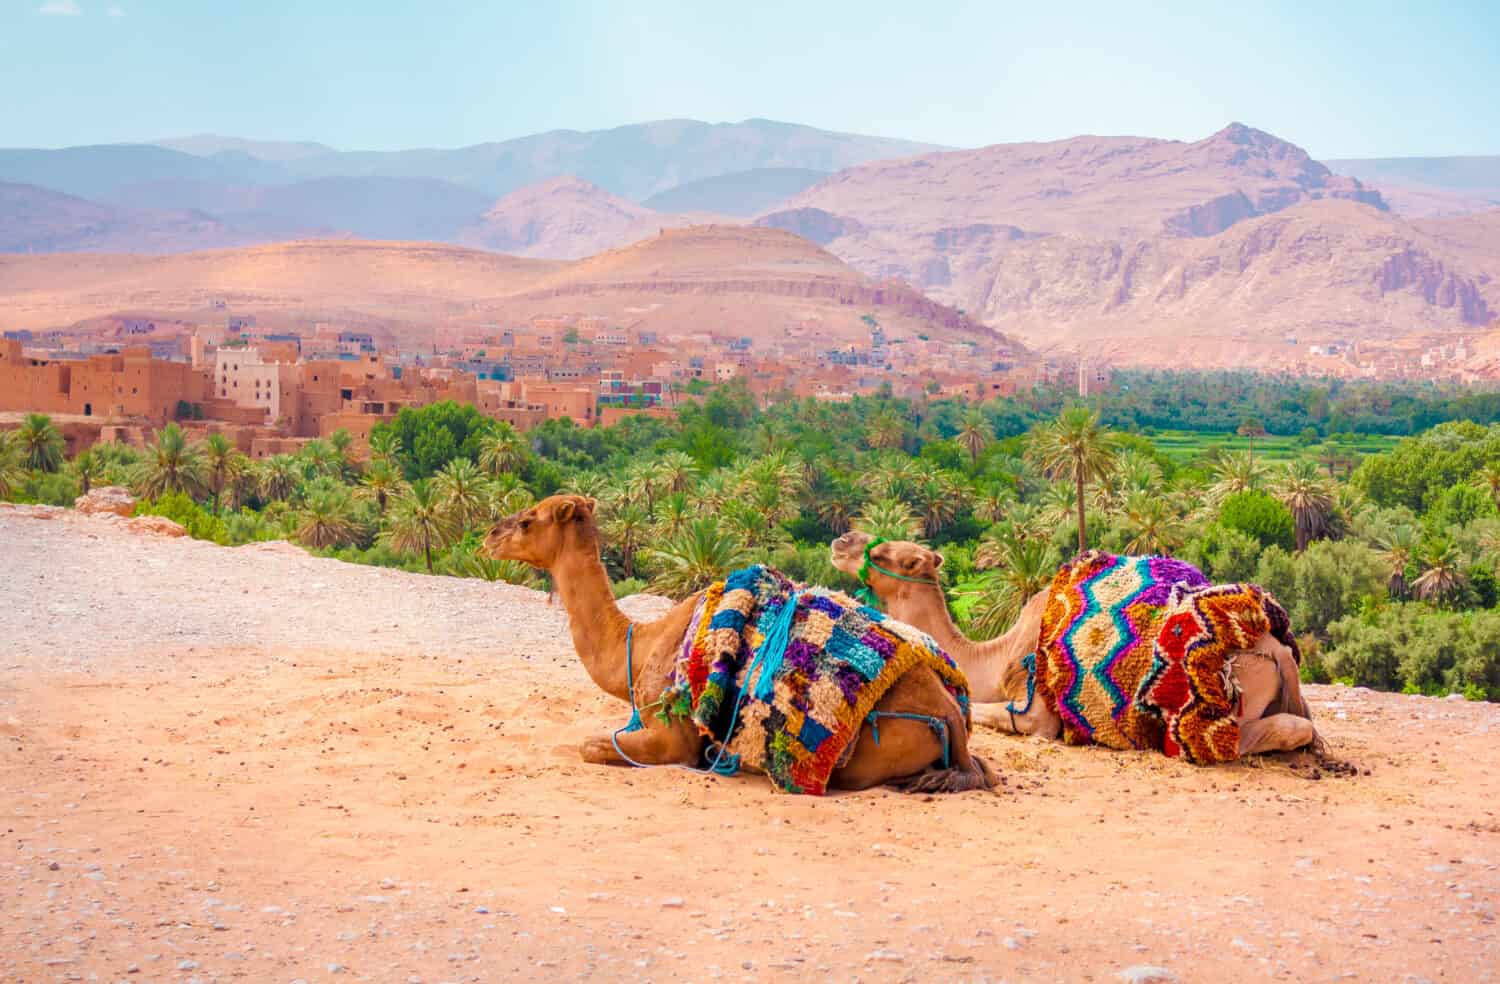 Camels rest on the border of a cliff with a village on the back. It is located in Morroco, Africa.